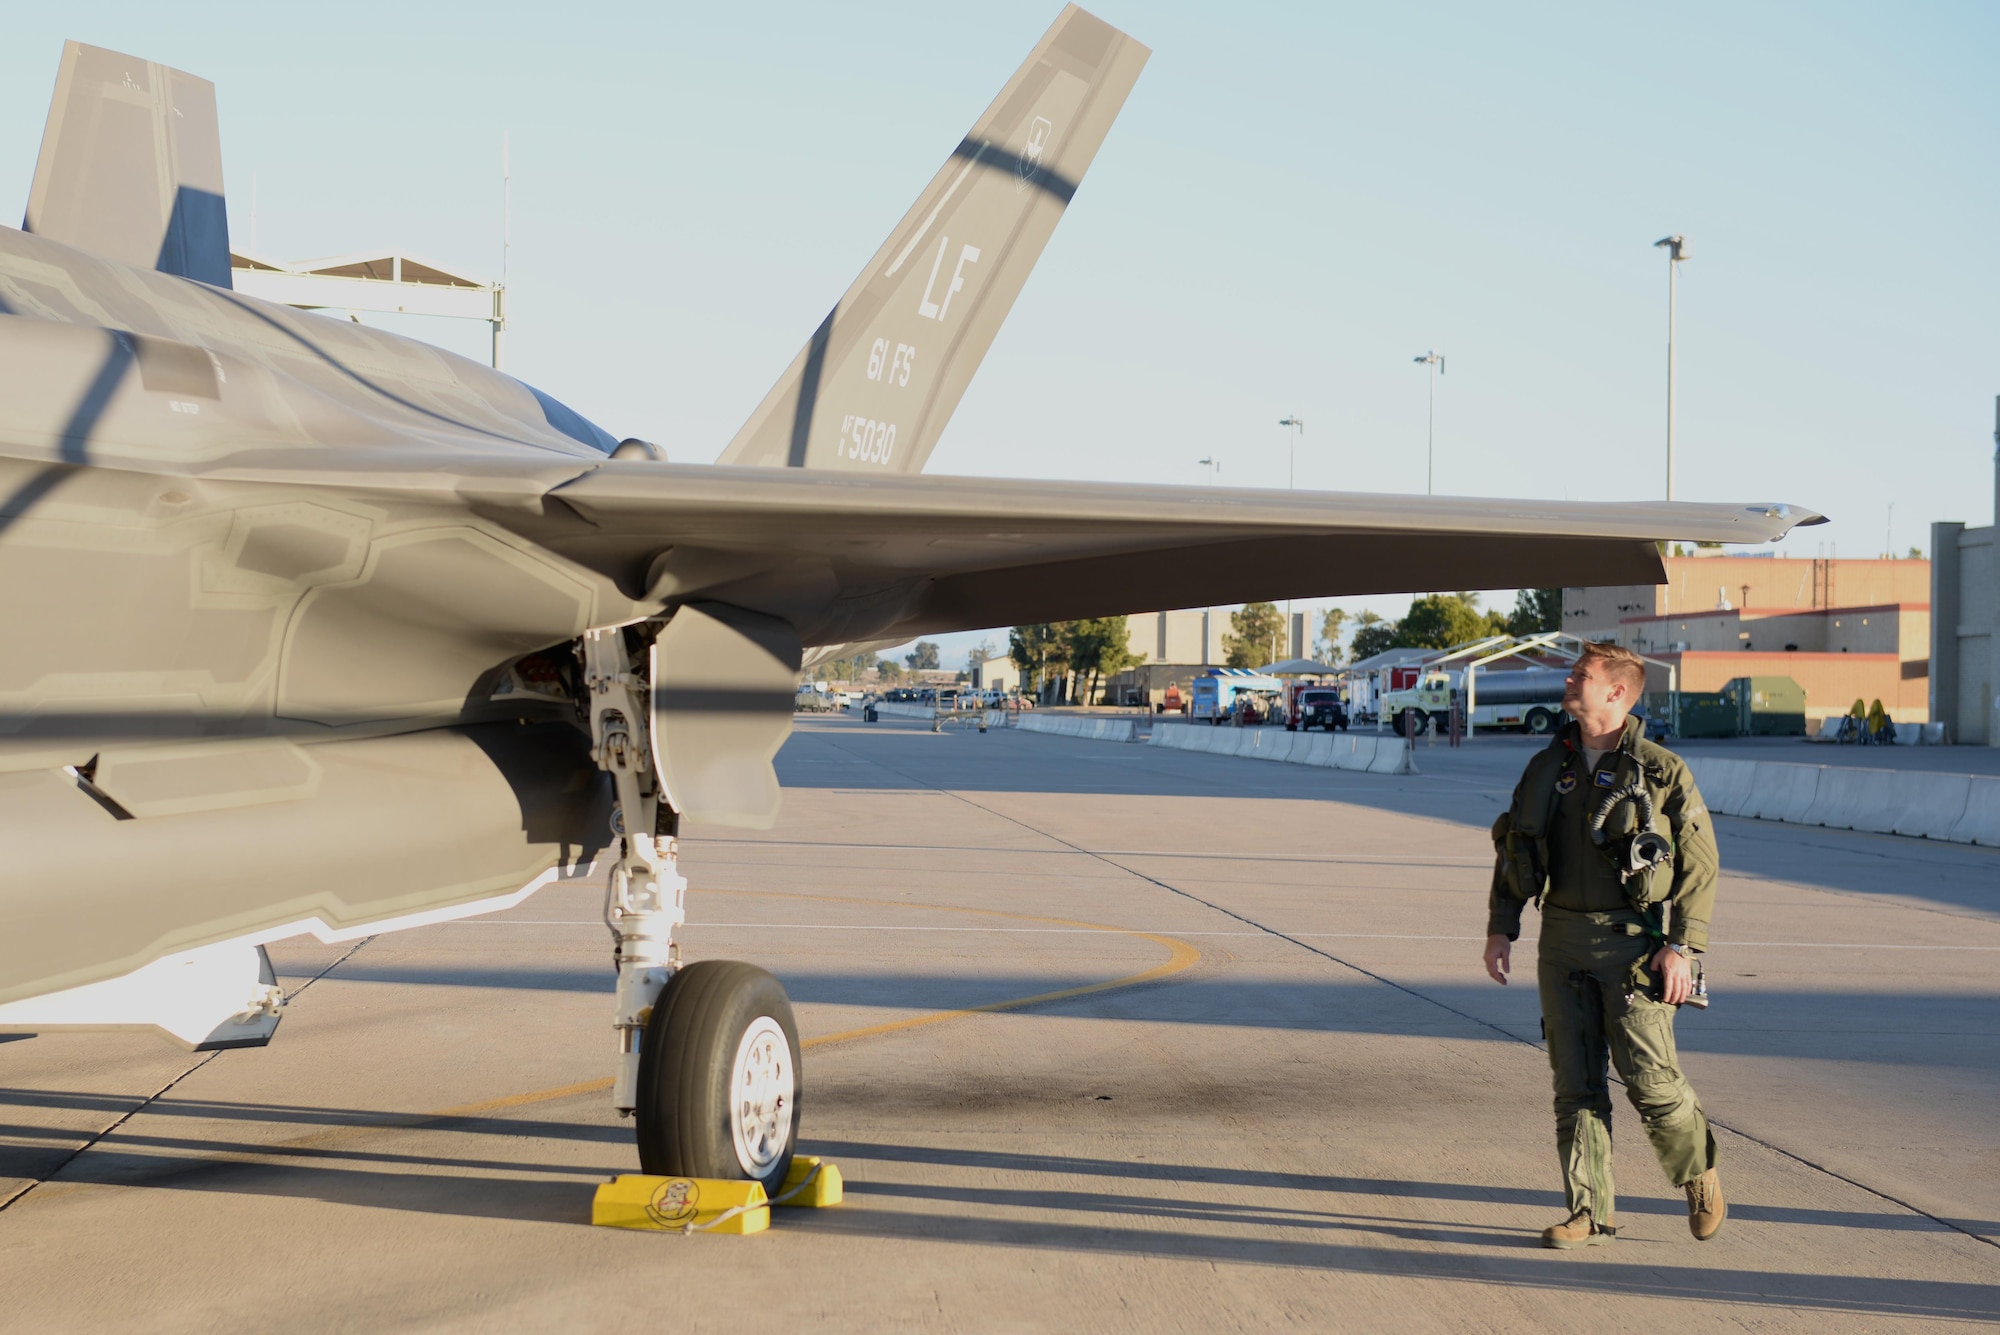 Lt. Col. Matthew Hayden, 56th Fighter Wing chief of safety and pilot attached to the 61st Fighter Squadron, inspects his F-35 before entering the cockpit and beginning take-off procedures, Feb. 2, 2016, at Luke Air Force Base. Hayden became the first Luke pilot to achieve 500 flight hours in an F-35. (U.S. Air Force photo by Airman 1st Class Ridge Shan)